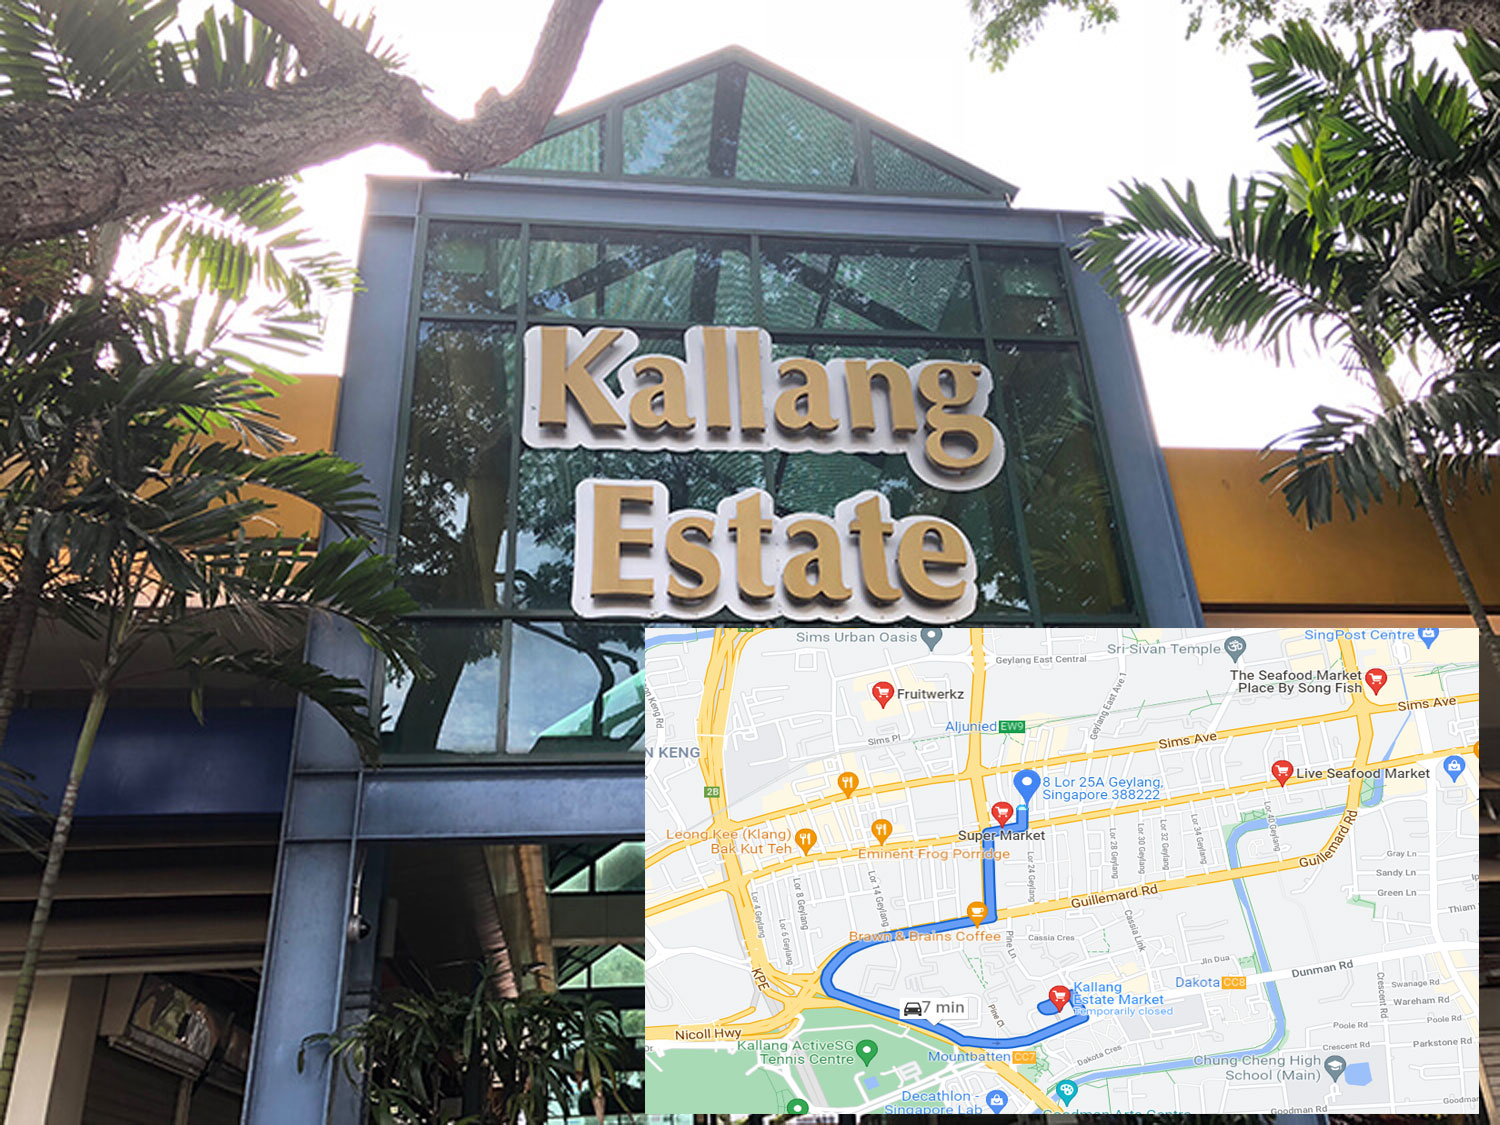 It will take about 7 minutes to drive from Zyanya Condo to Kallang Estate Market